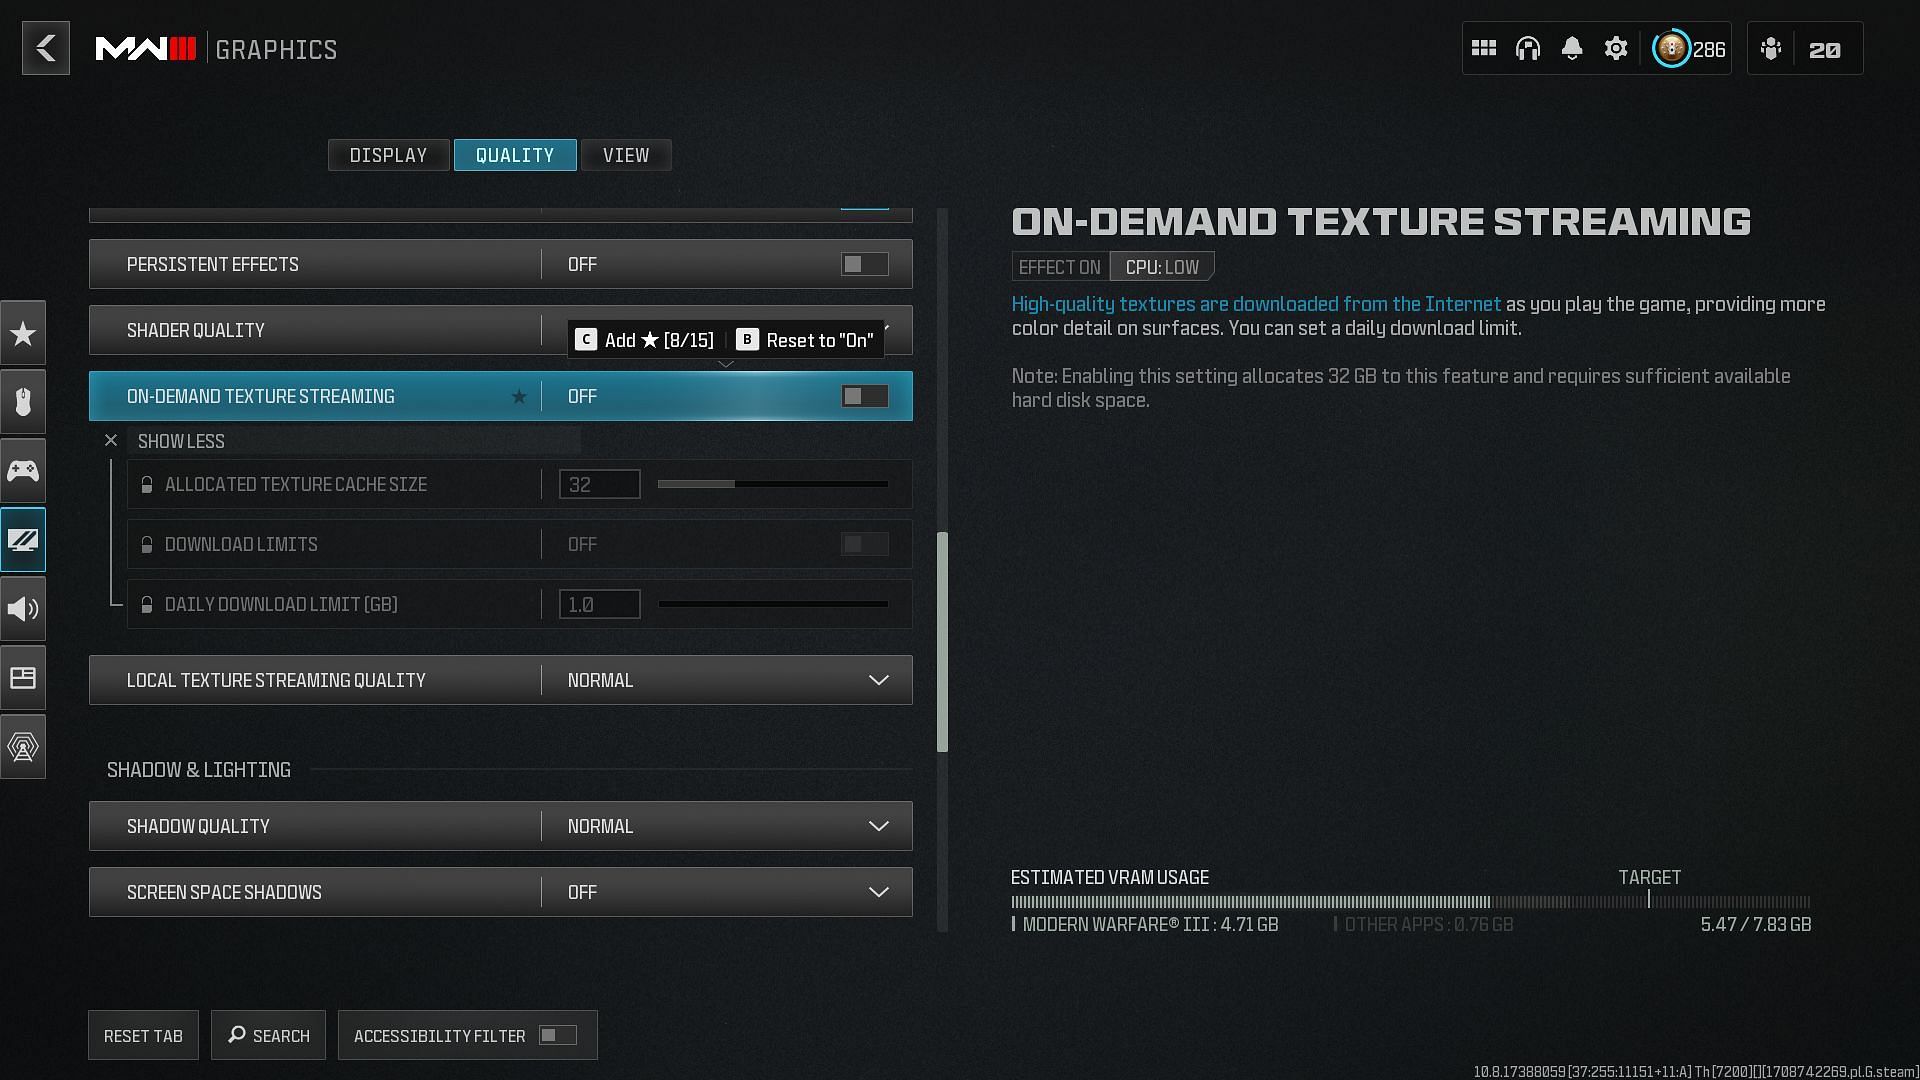 Turning off &#039;On-Demand Texture Streaming&#039; in Warzone (Image via Activision)